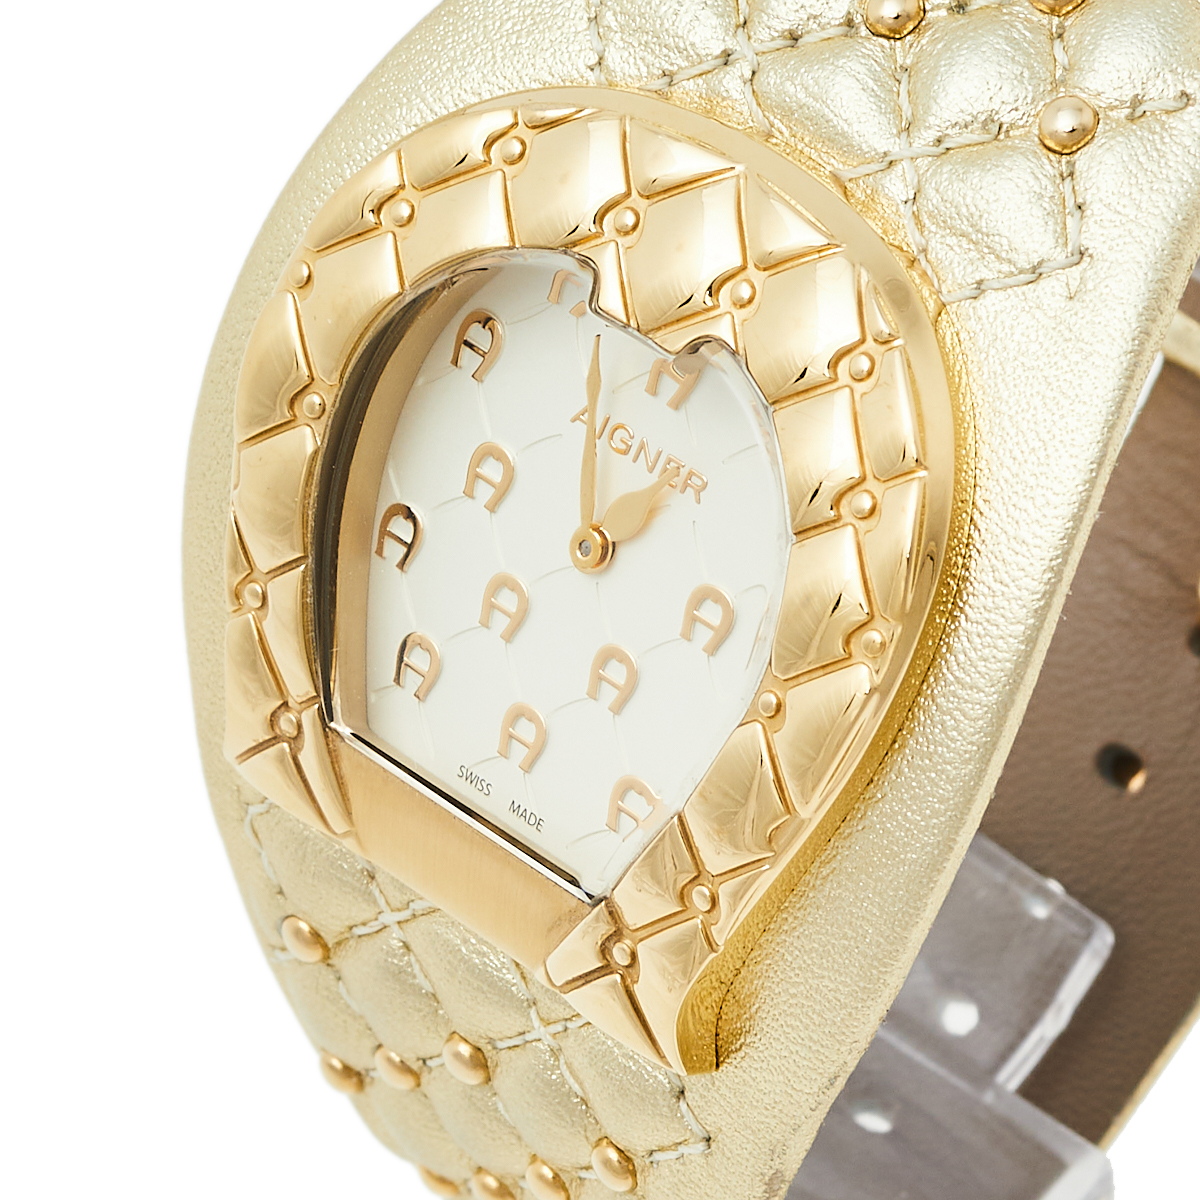 

Aigner Gold Plated Stainless Steel Leather L'Aquila A41200 Women's Wristwatch, White